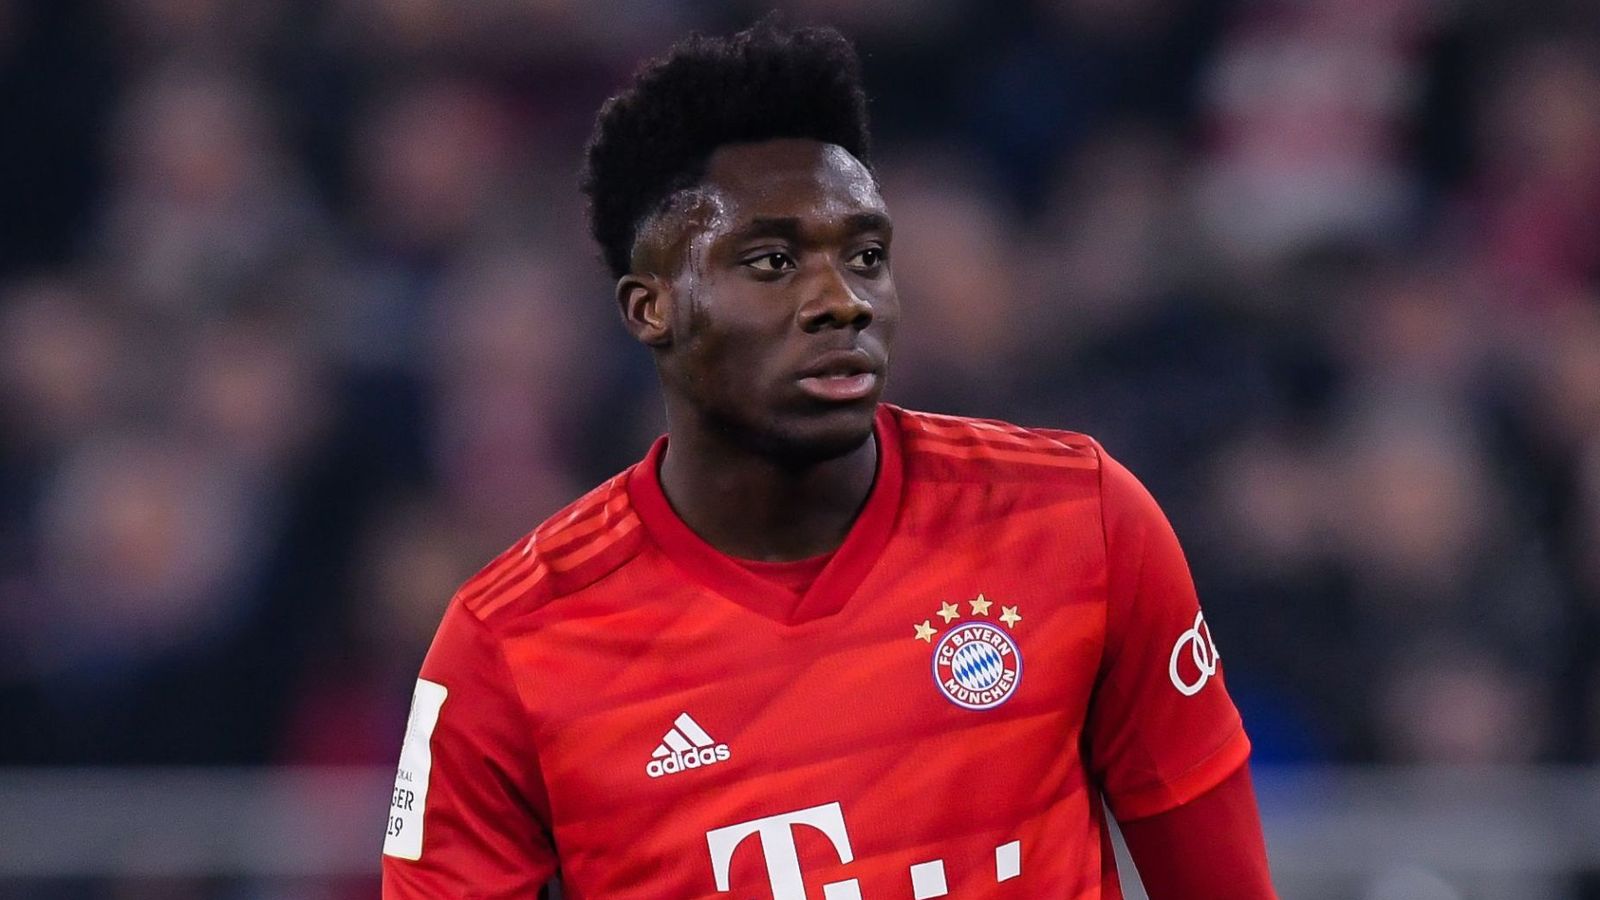 Bayern Munich sign Alphonso Davies to long-term contract - Second most  valuable left-back